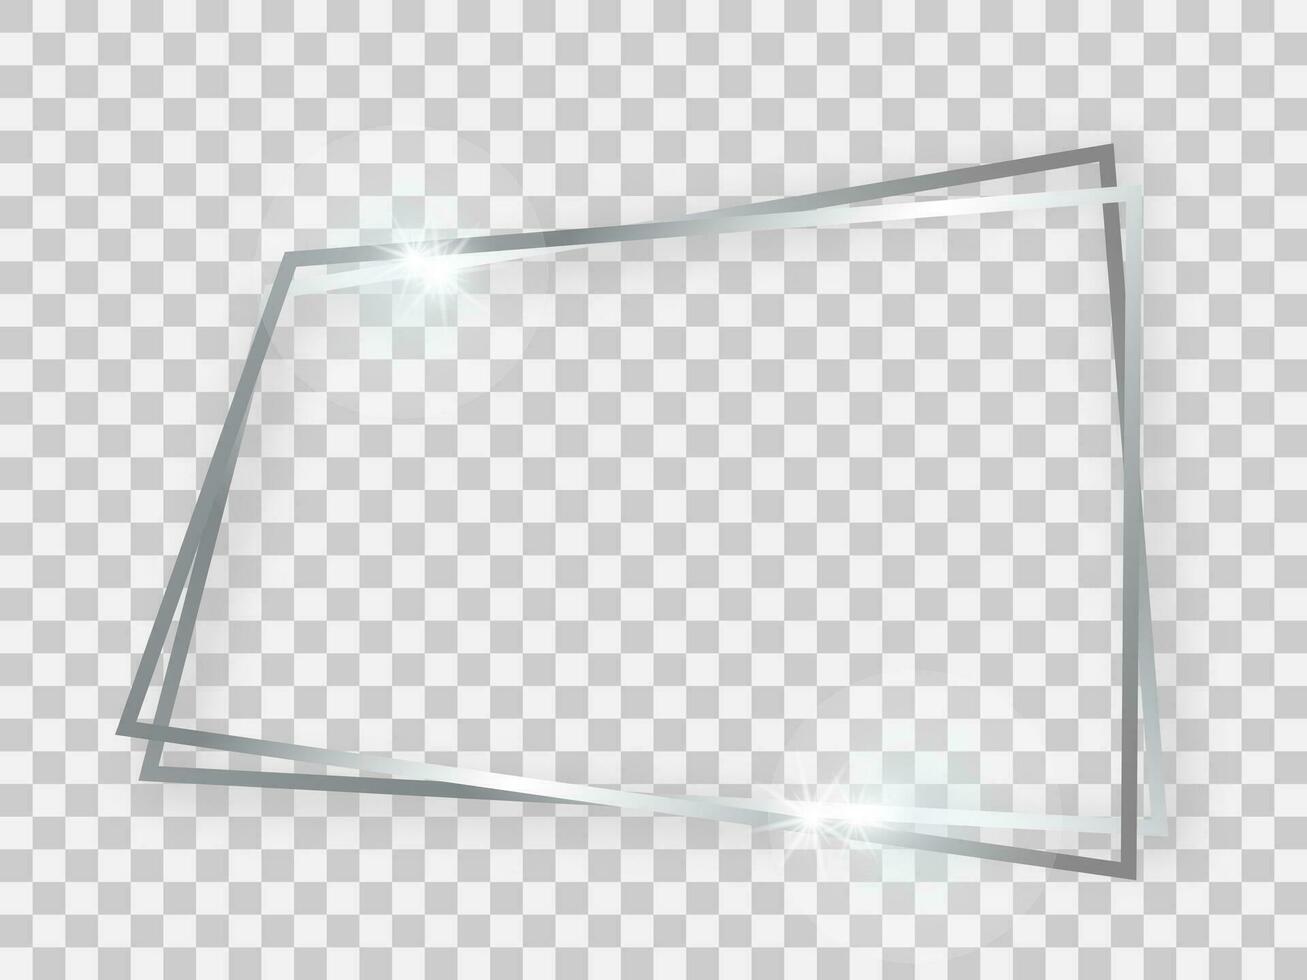 Double silver shiny trapezoid frame with glowing effects and shadows vector